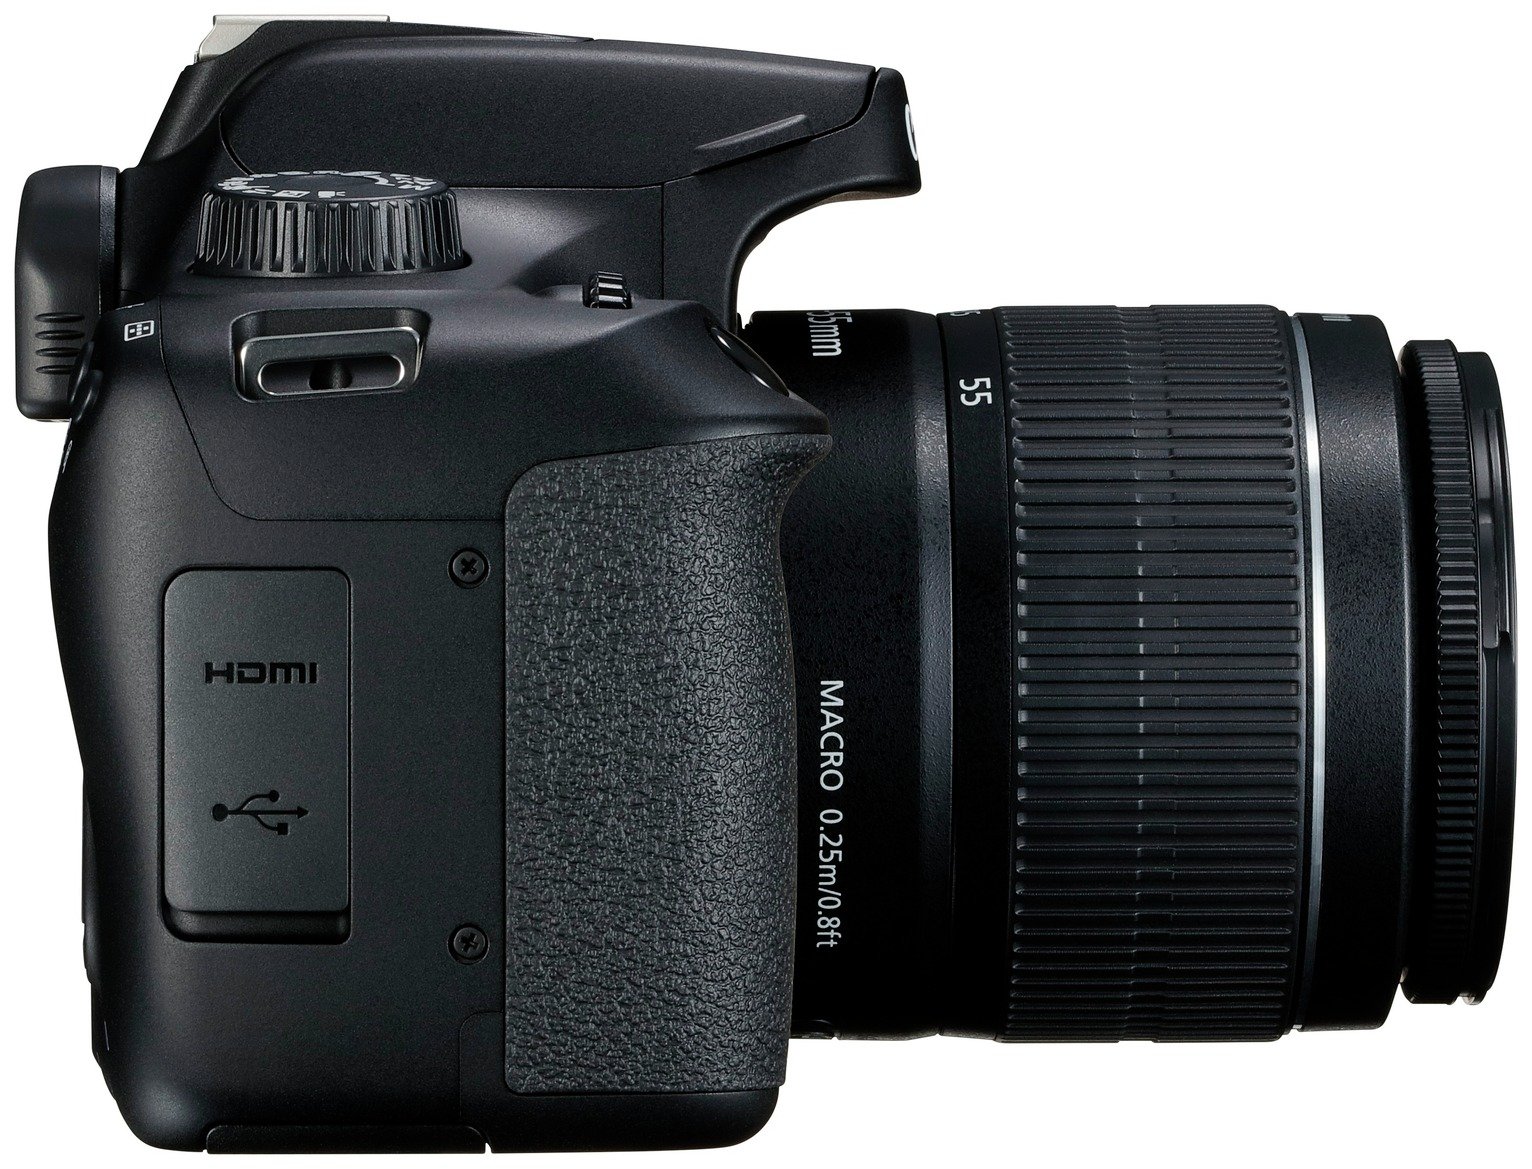 Canon EOS 4000D DSLR Camera Body with 18-55mm Lens Review